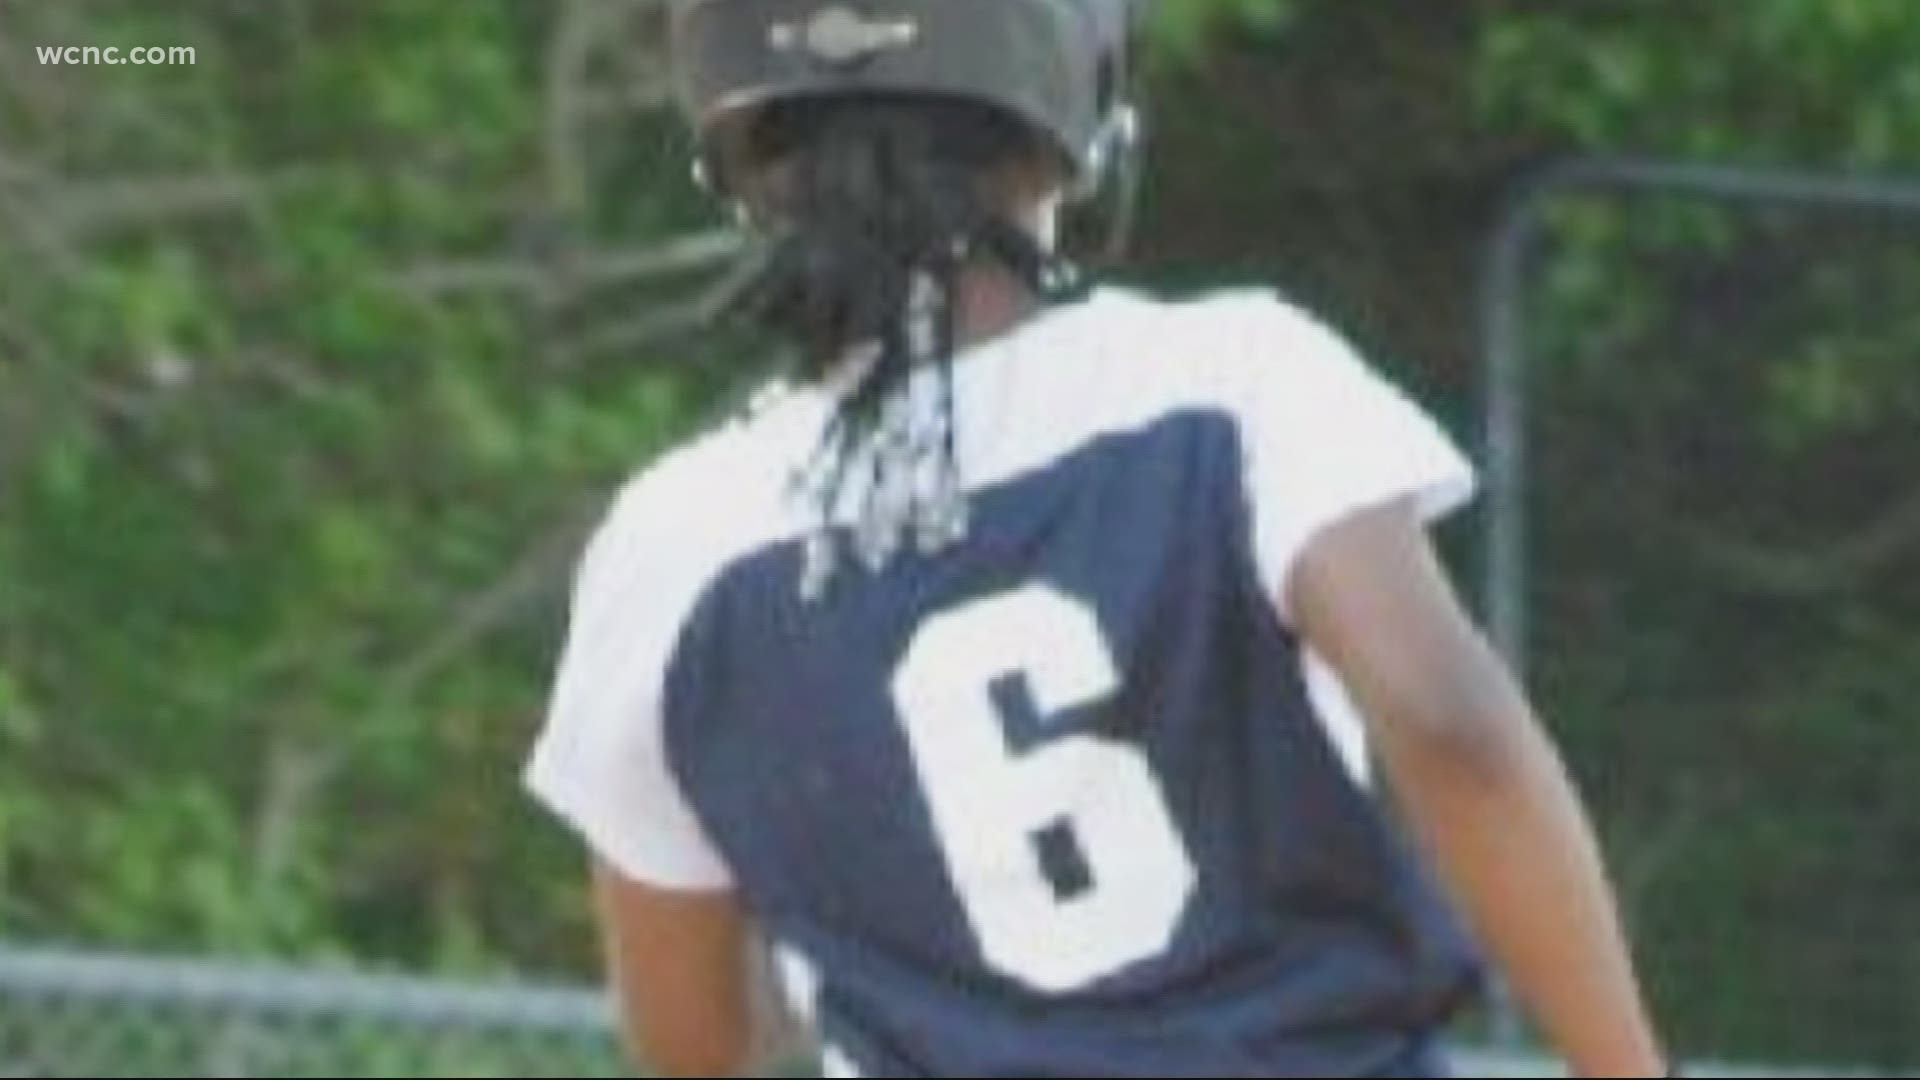 Tanya Mendis looks into why a Durham high school softball player had to cut her hair in the middle of a game, and what the school is doing.